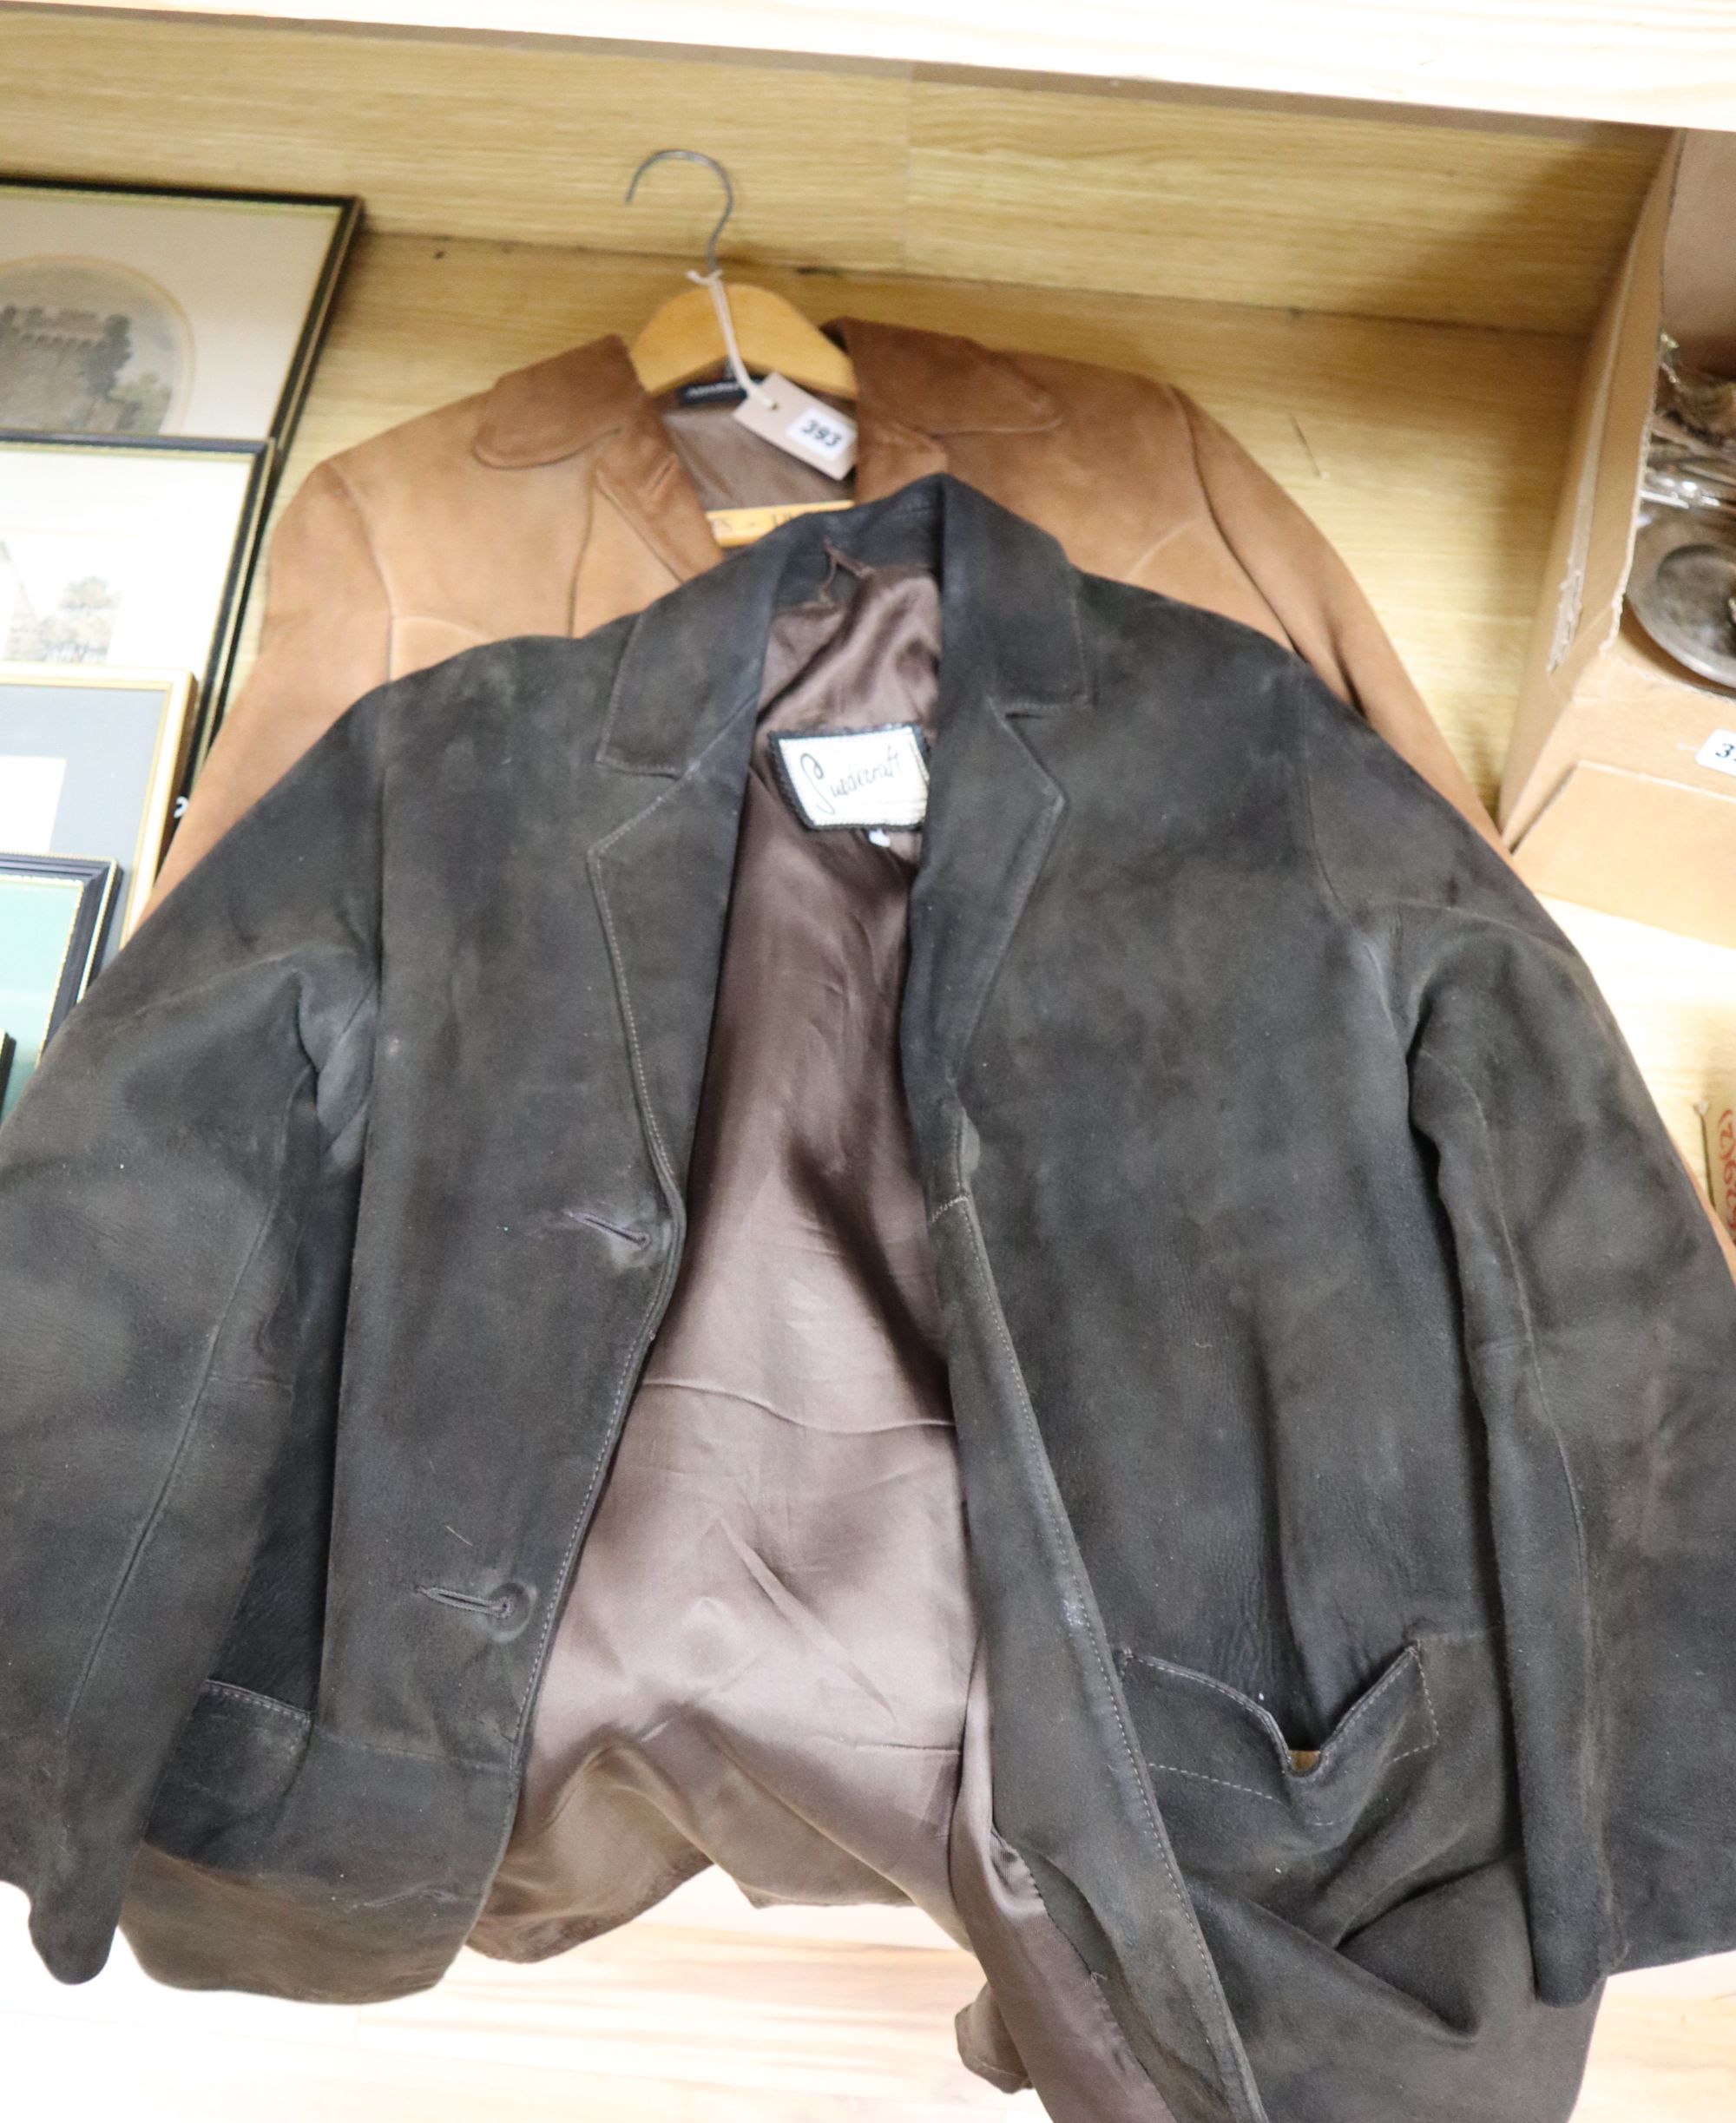 A light tan 1960s suede jacket and a similar chocolate brown jacket